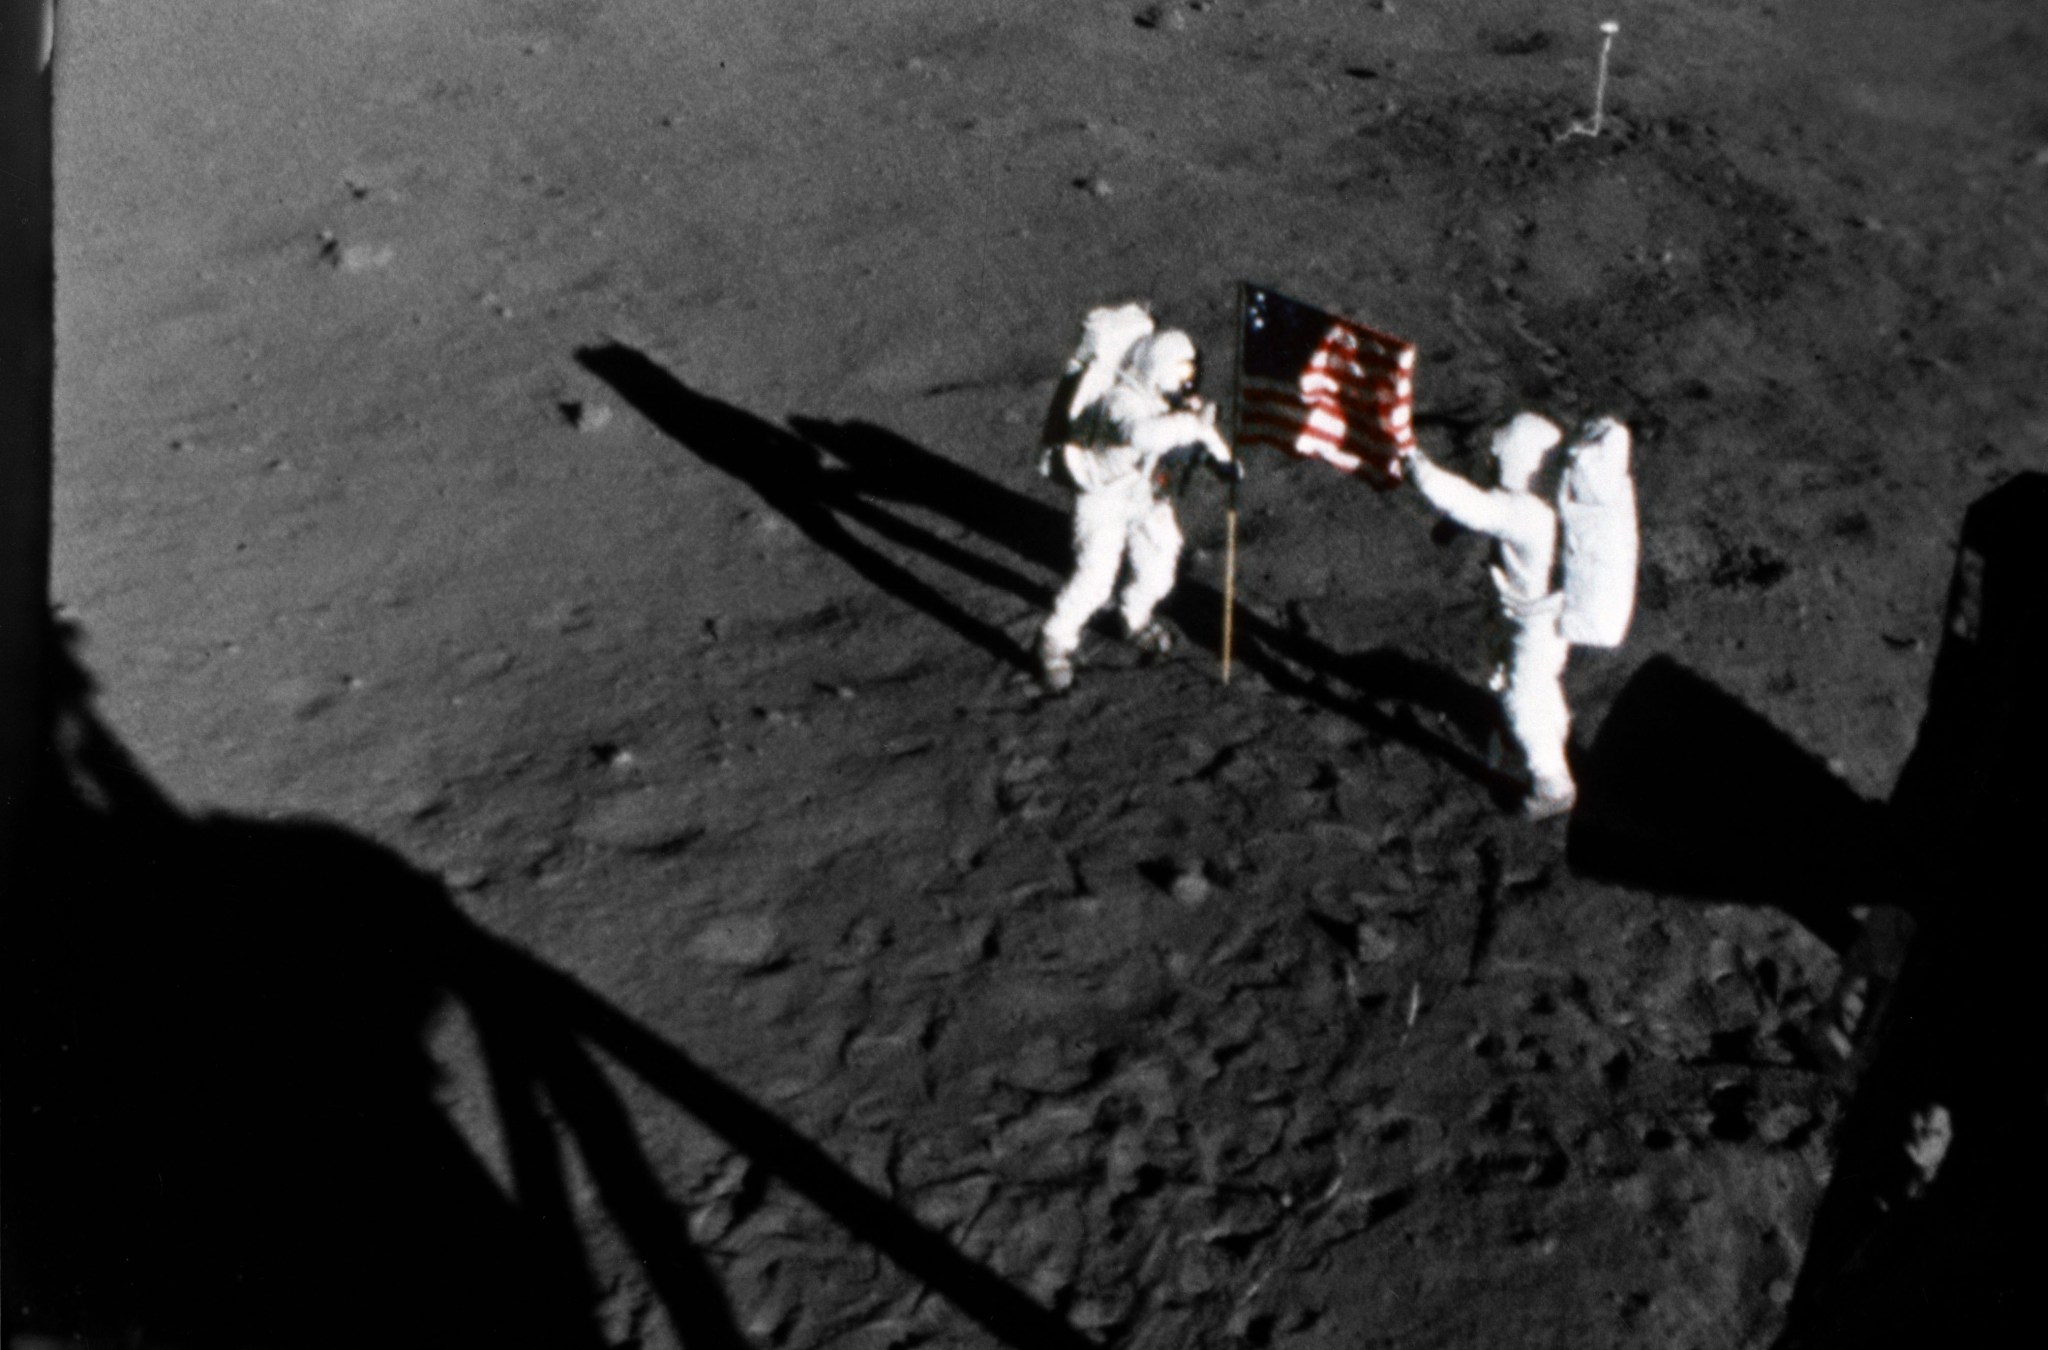 Apollo 11 astronauts Neil Armstrong and Buzz Aldrin plant a flag on the Moon.